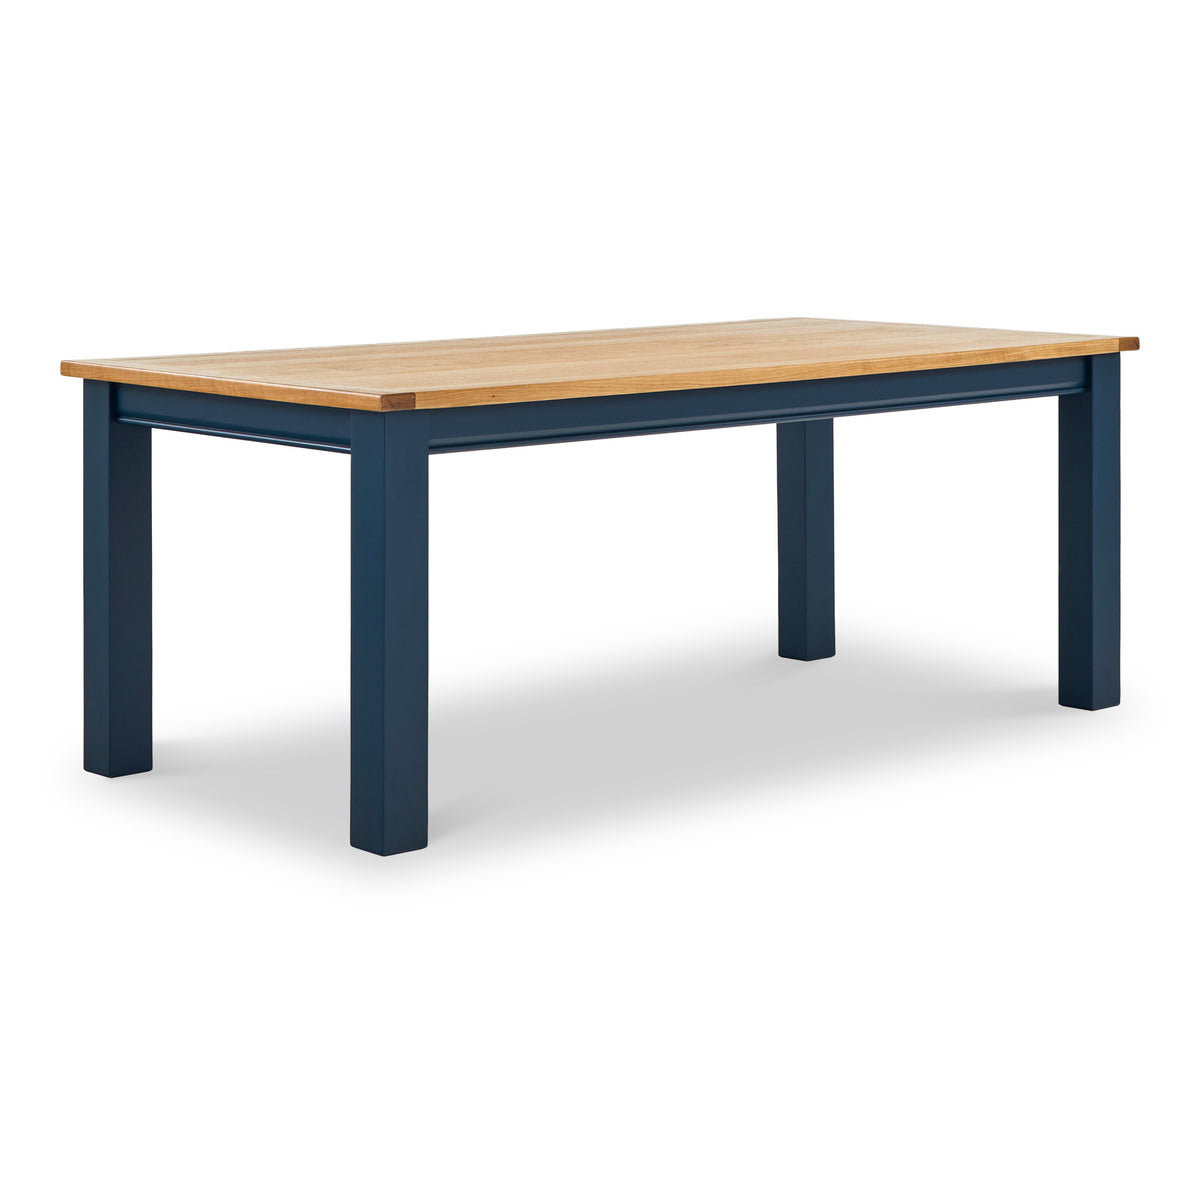 Bude Navy 200cm Fixed Dining Table from Roseland Furniture